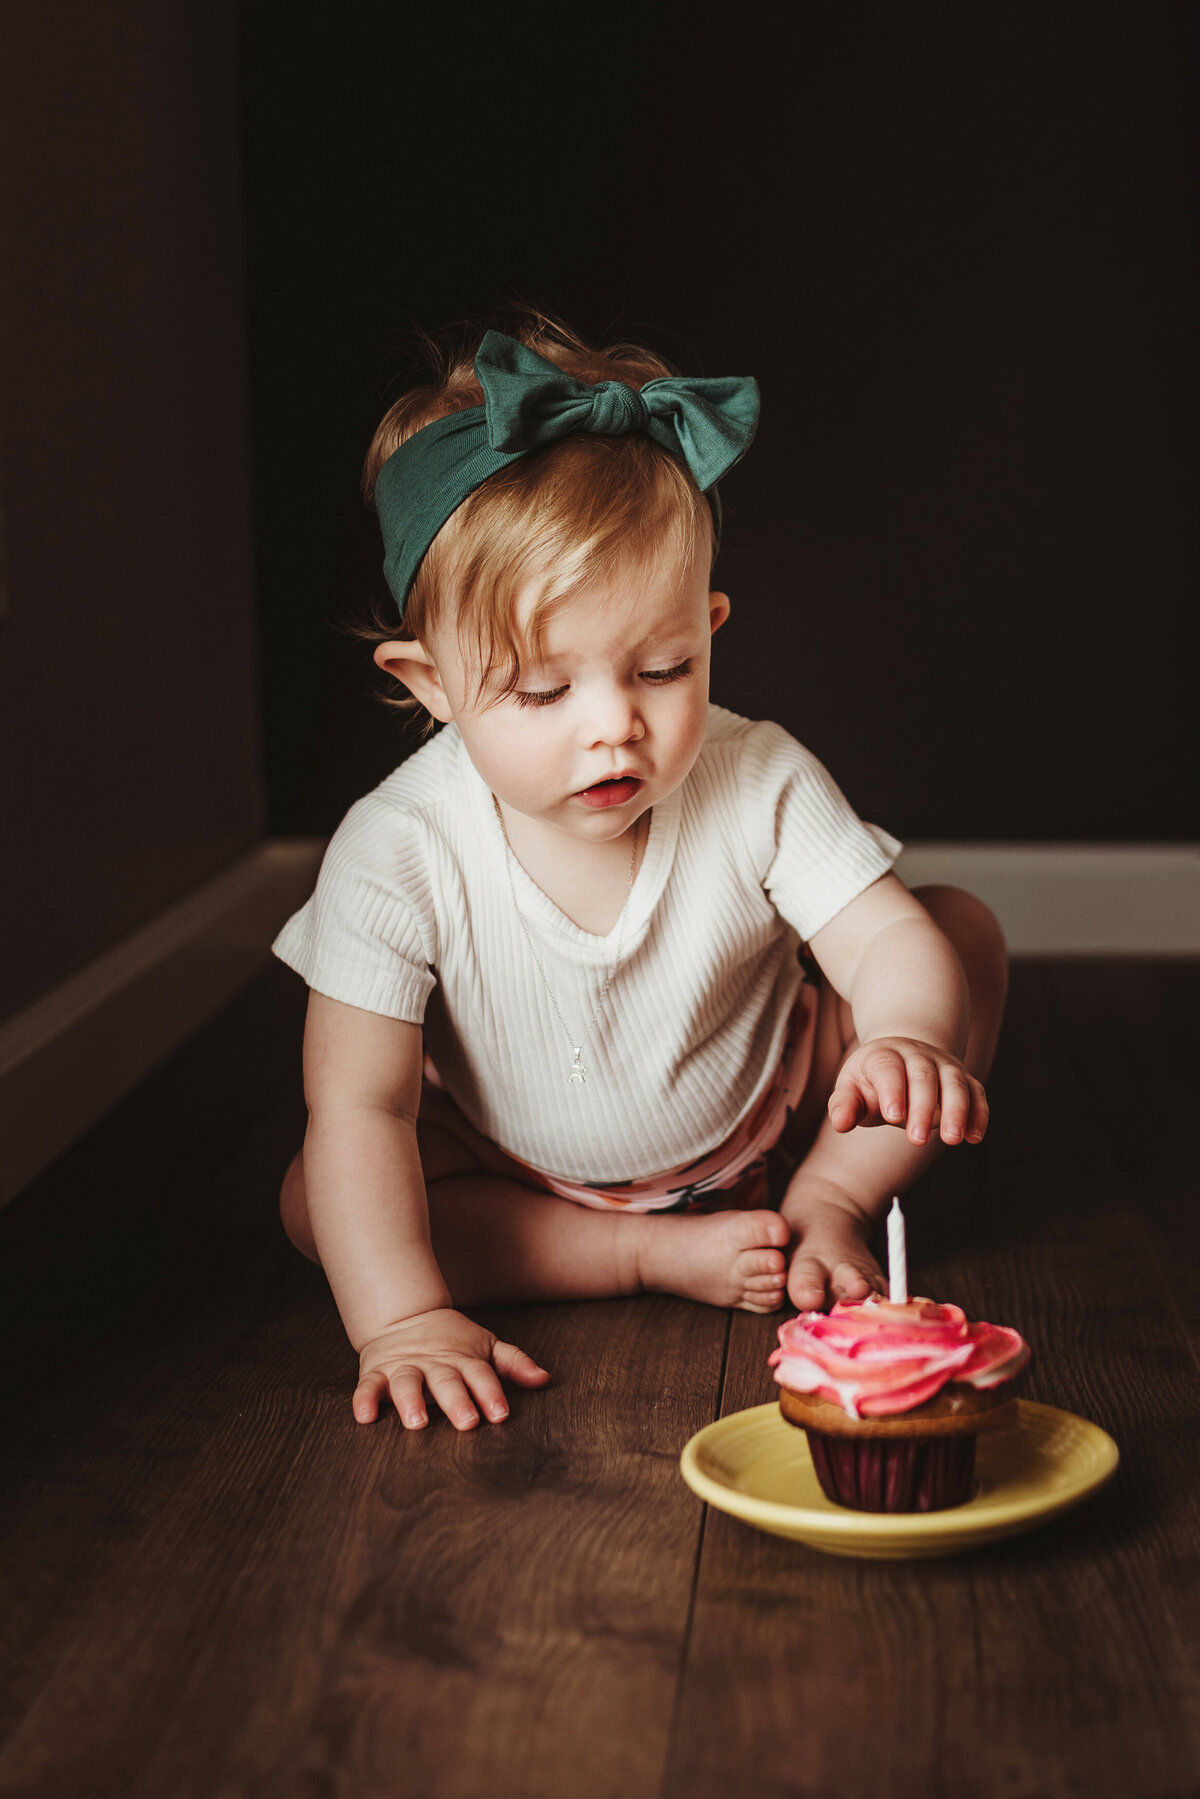 A little girl with a green hairband is about to dig into a cupcake with pink icing.